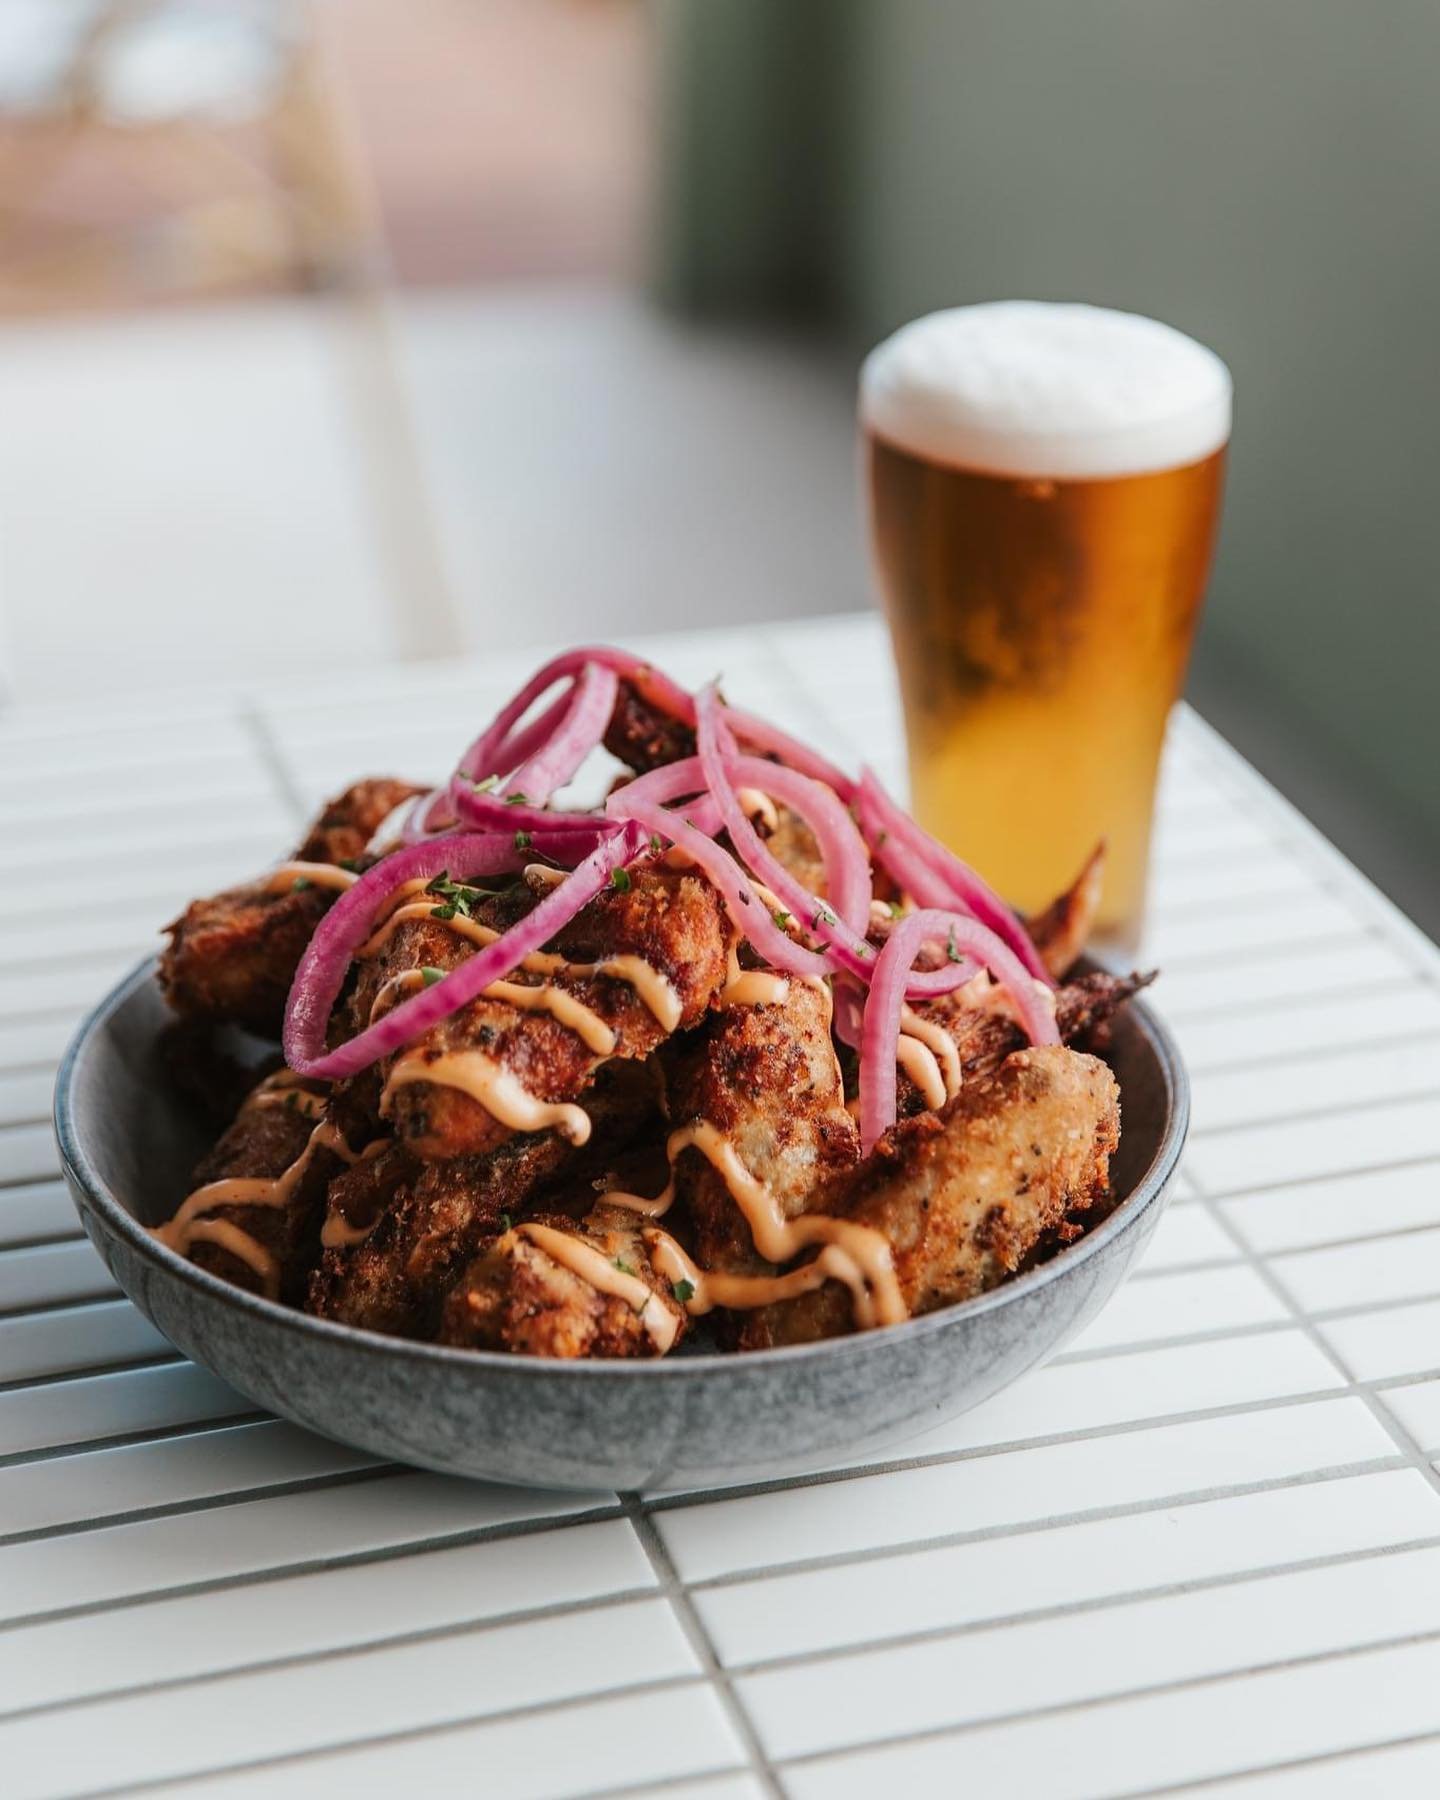 BACK TO BACK HAPPY HOUR 🍻

Lucky for us, Port and Crows are playing back to back games tomorrow, so we have our siren to siren Happy Hour running the whole way through 🏉

Why not add a plate of our delish wings as a footy snack too!

See you there 